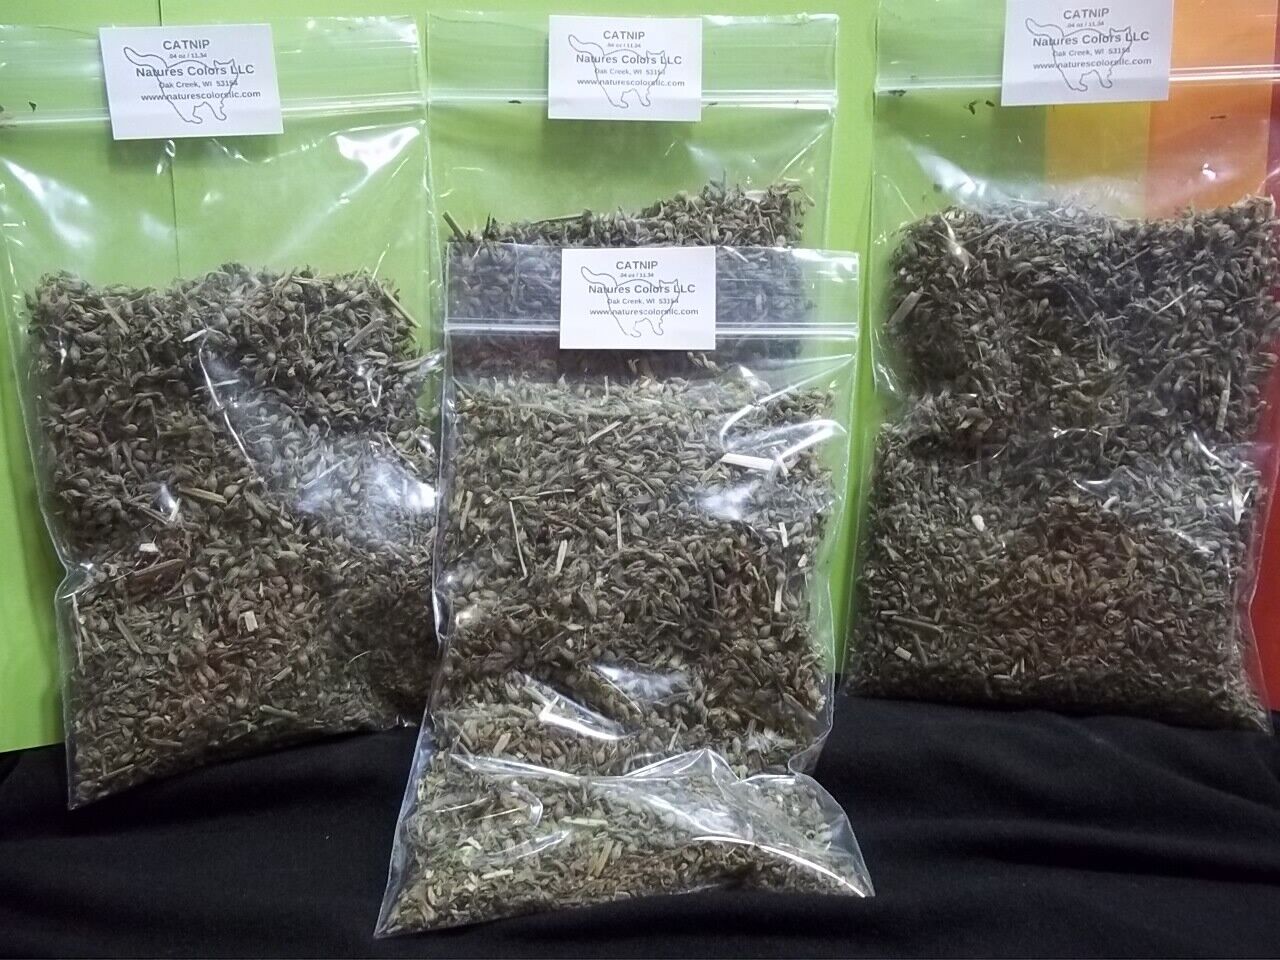 Catnip! 3 + 1 Bag Free Dried WOW Fresh Excellent Quality & Deal Check It Out!!!!